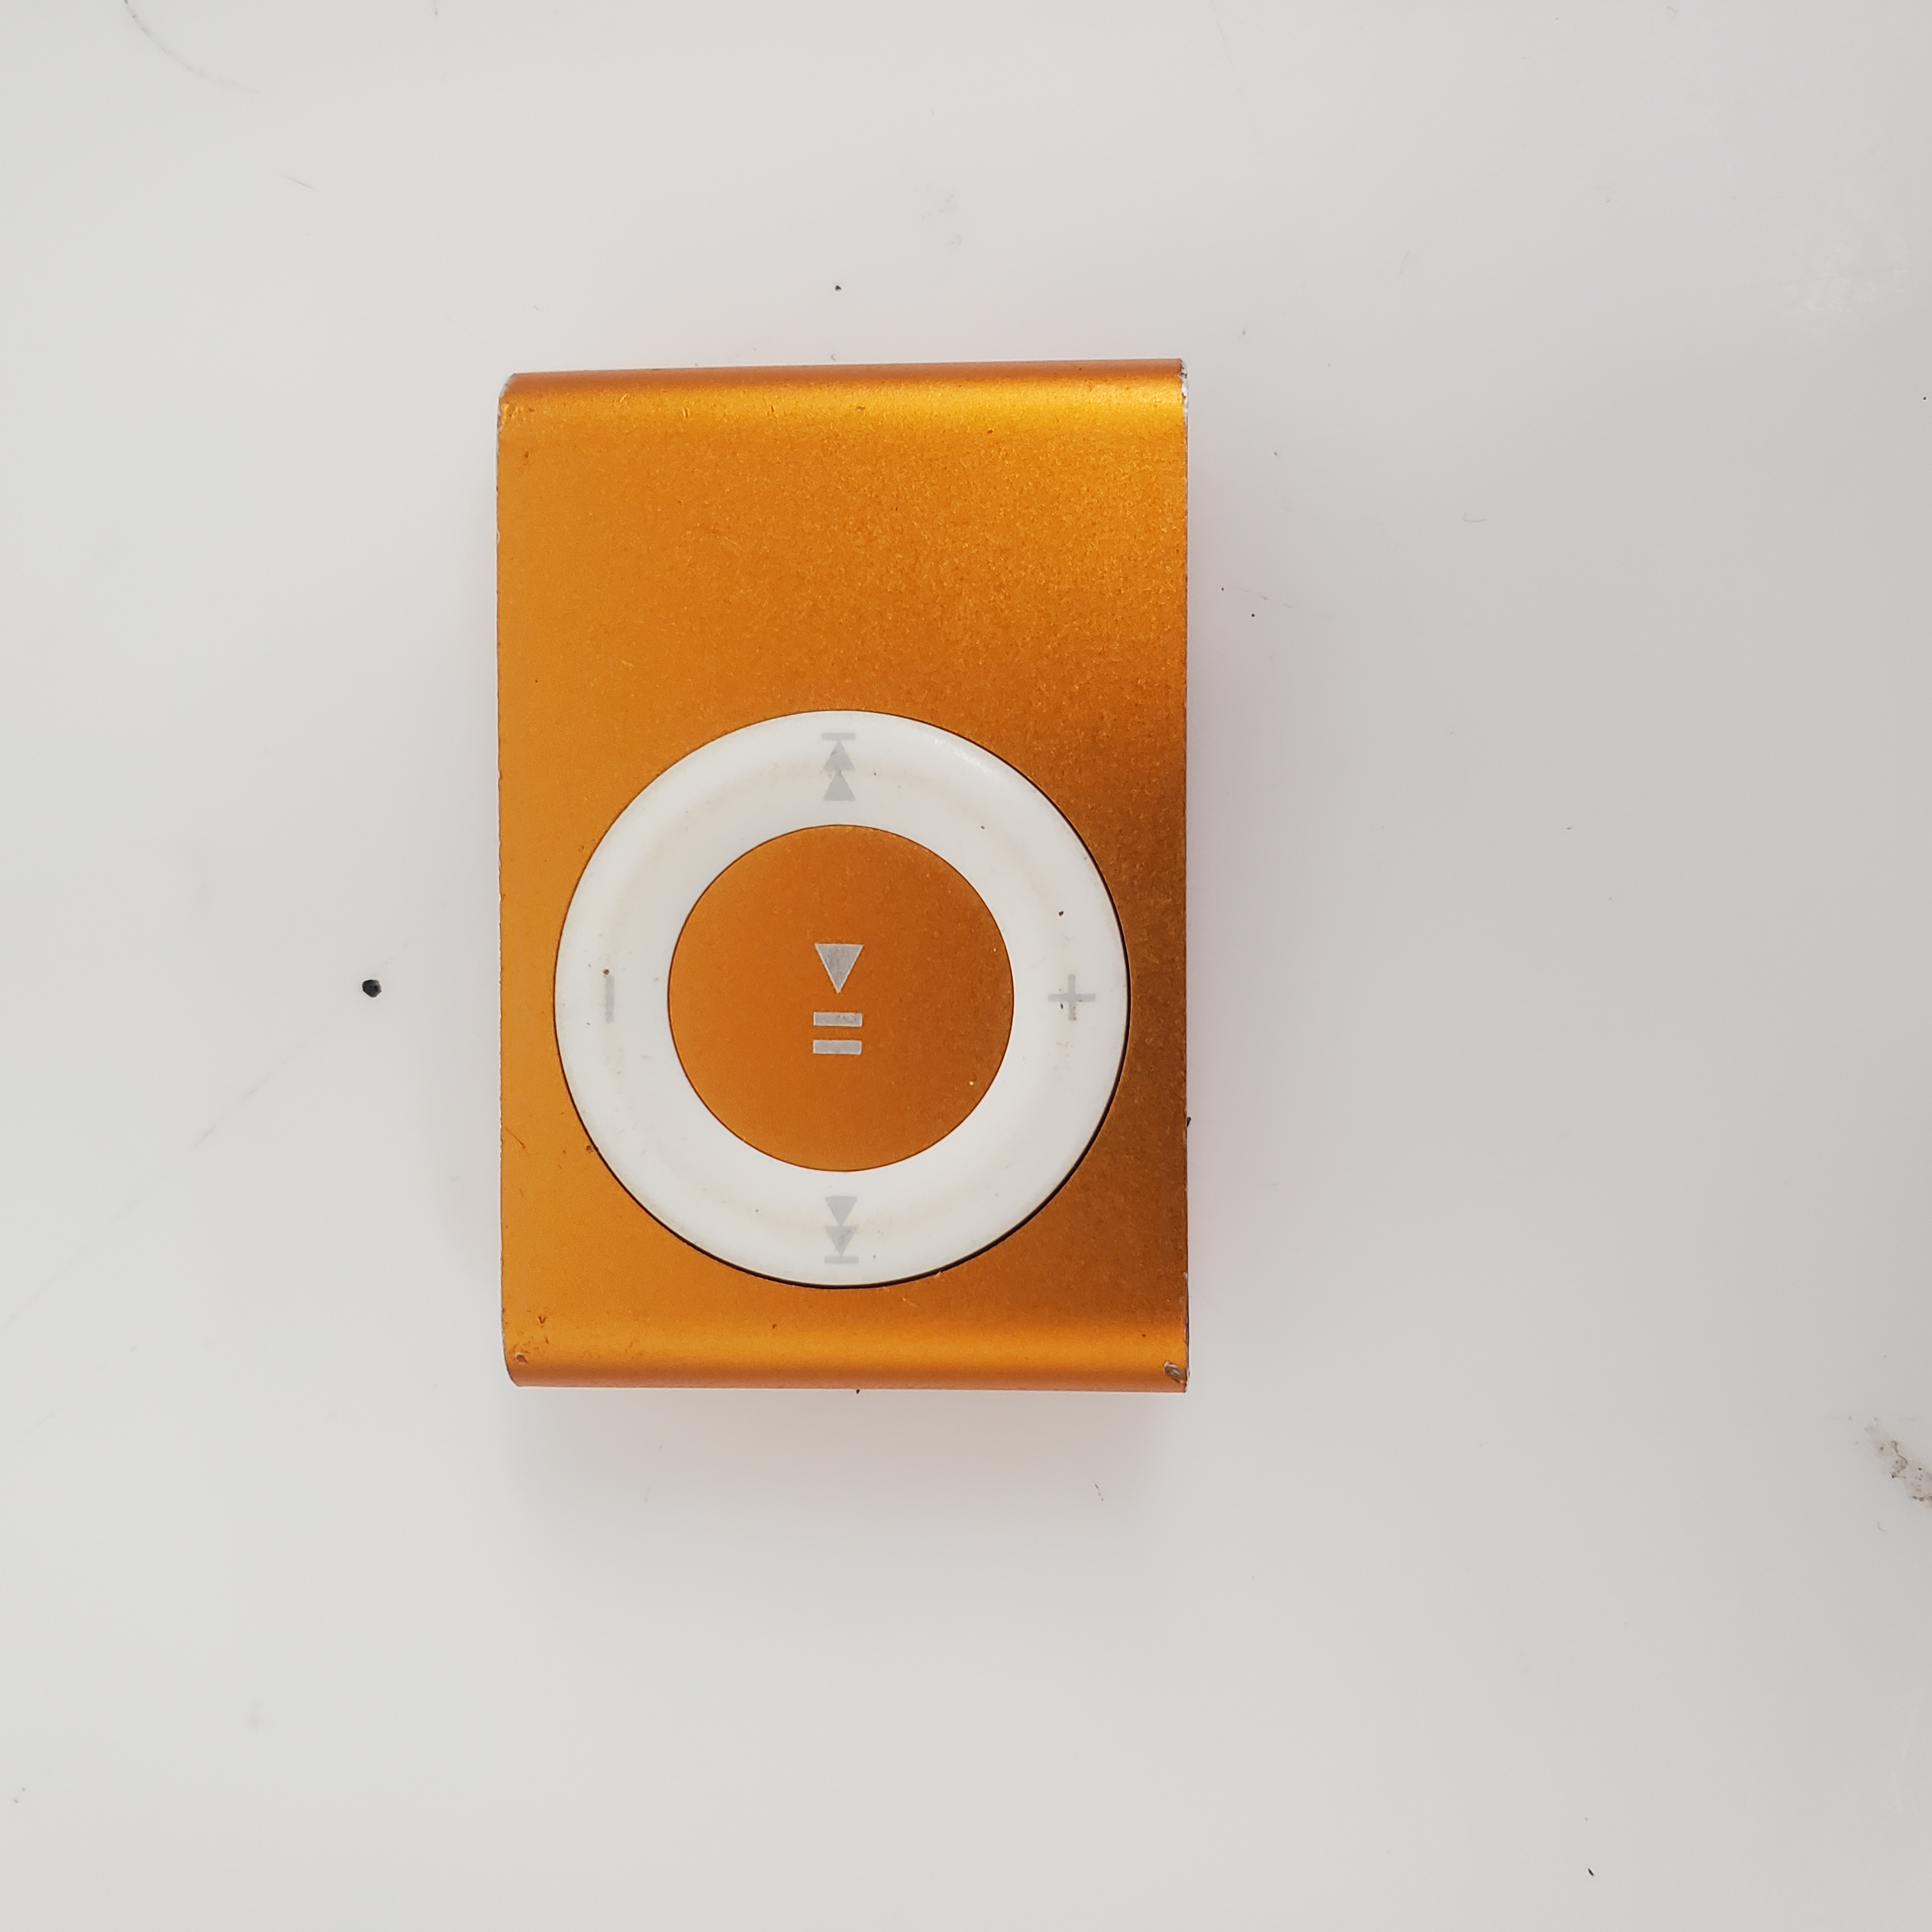 Buy the Apple A1373 Shuffle 4th Generation 2GB MP3 Player in Orange | GoodwillFinds